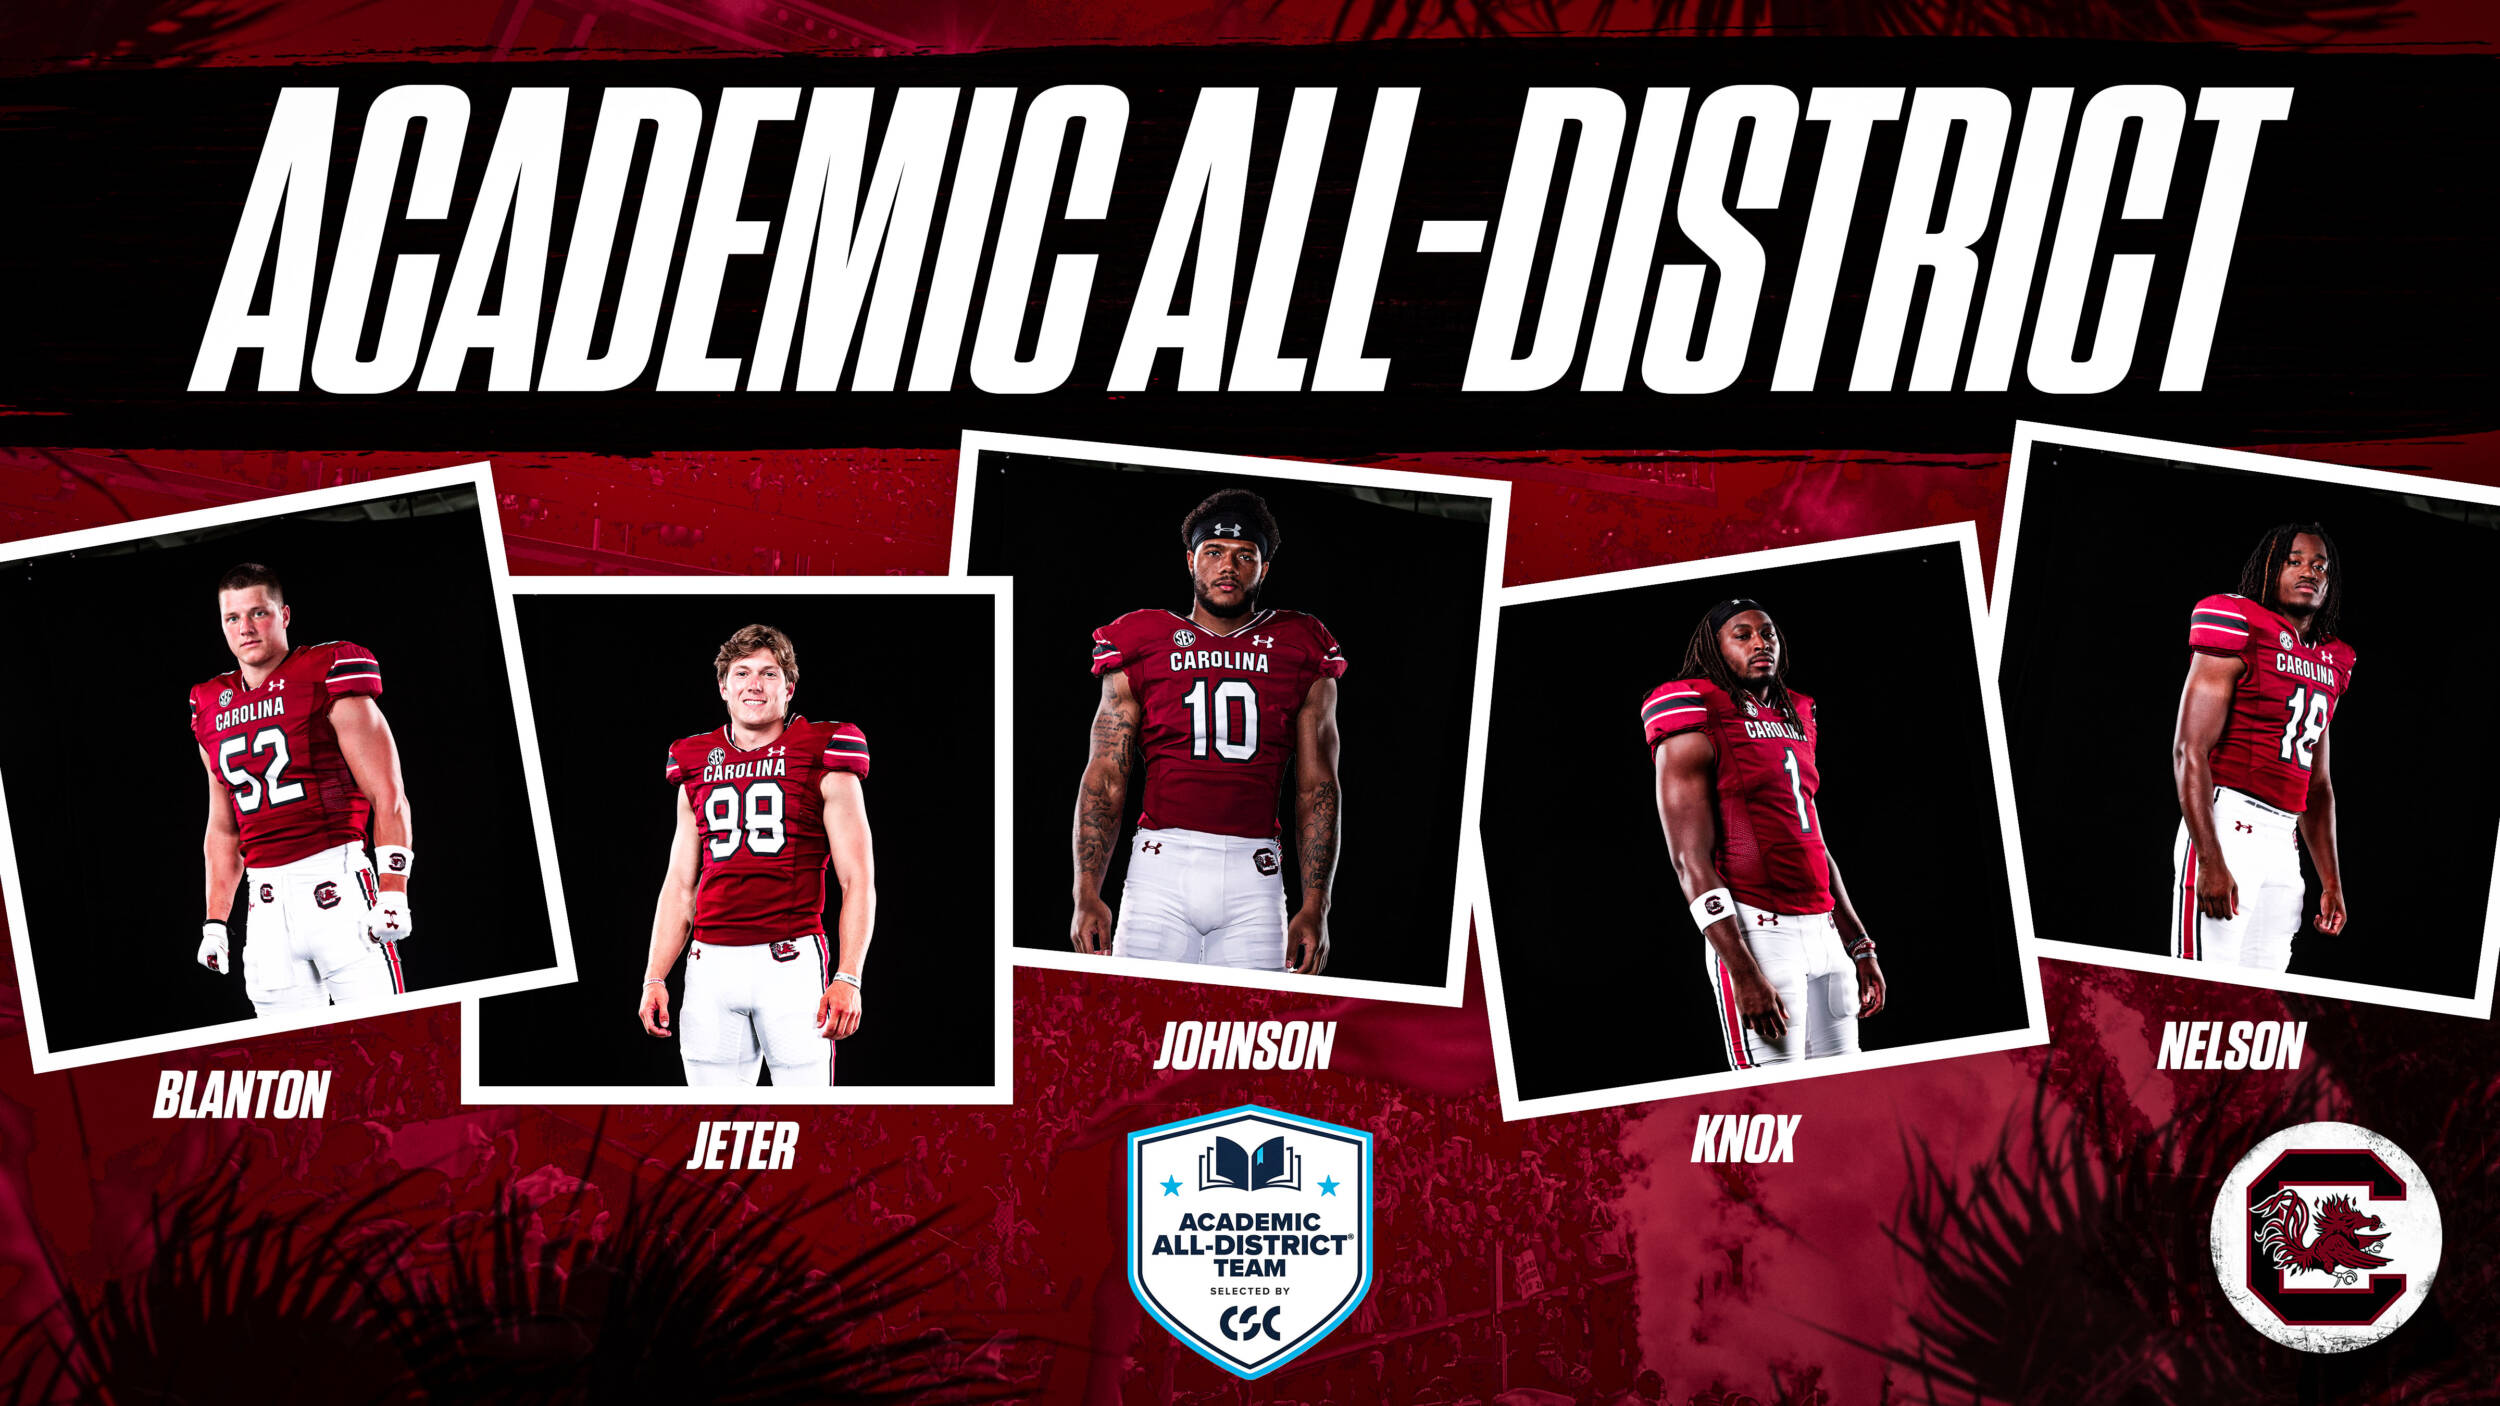 Five Gamecocks Named to Academic All-District Football Team